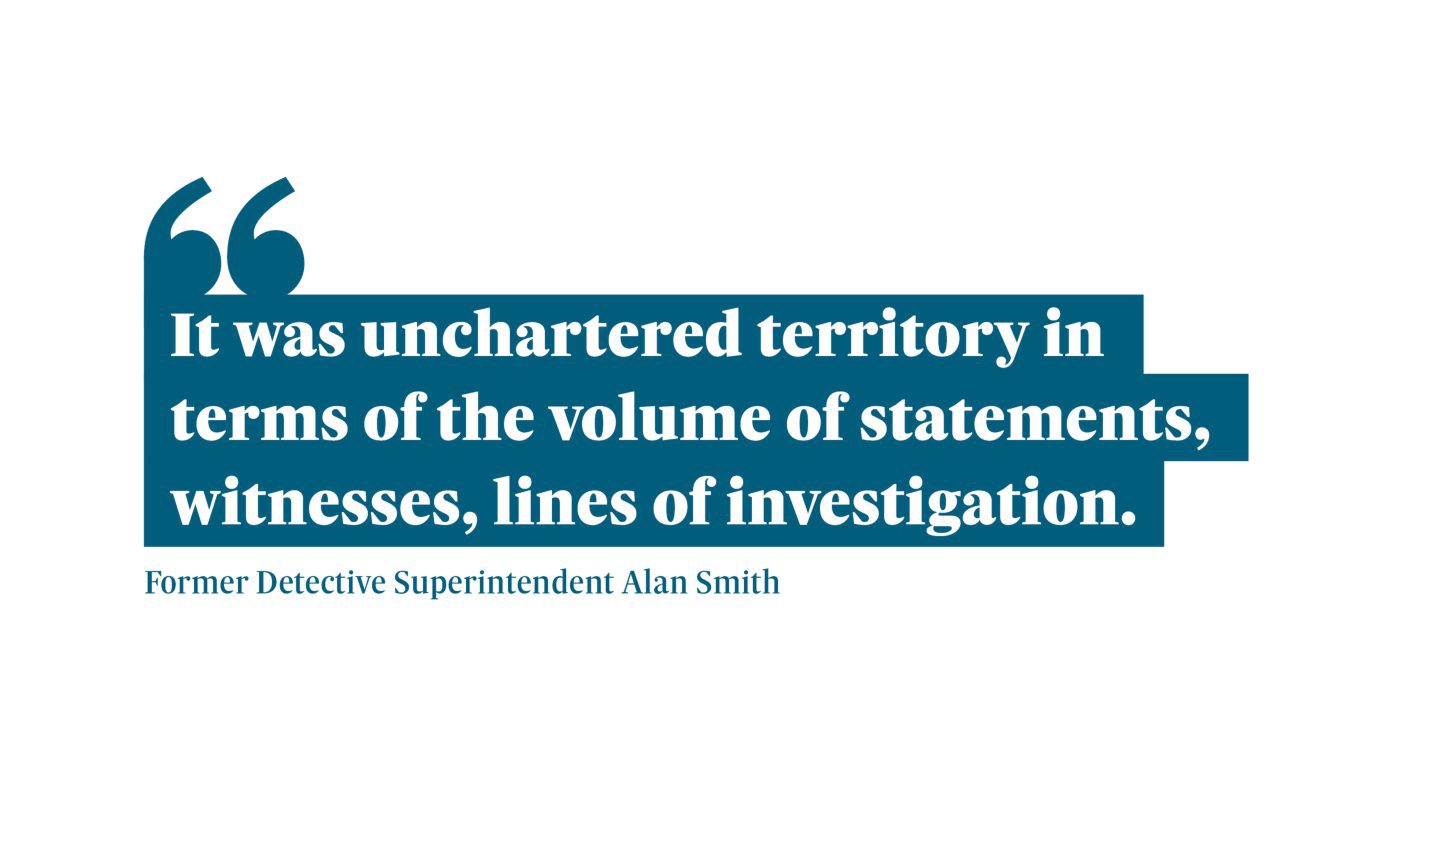 Quote from Former Detective Superintendent Alan Smith saying: "“It was unchartered territory in terms of the volume of statements, witnesses, lines of investigation."